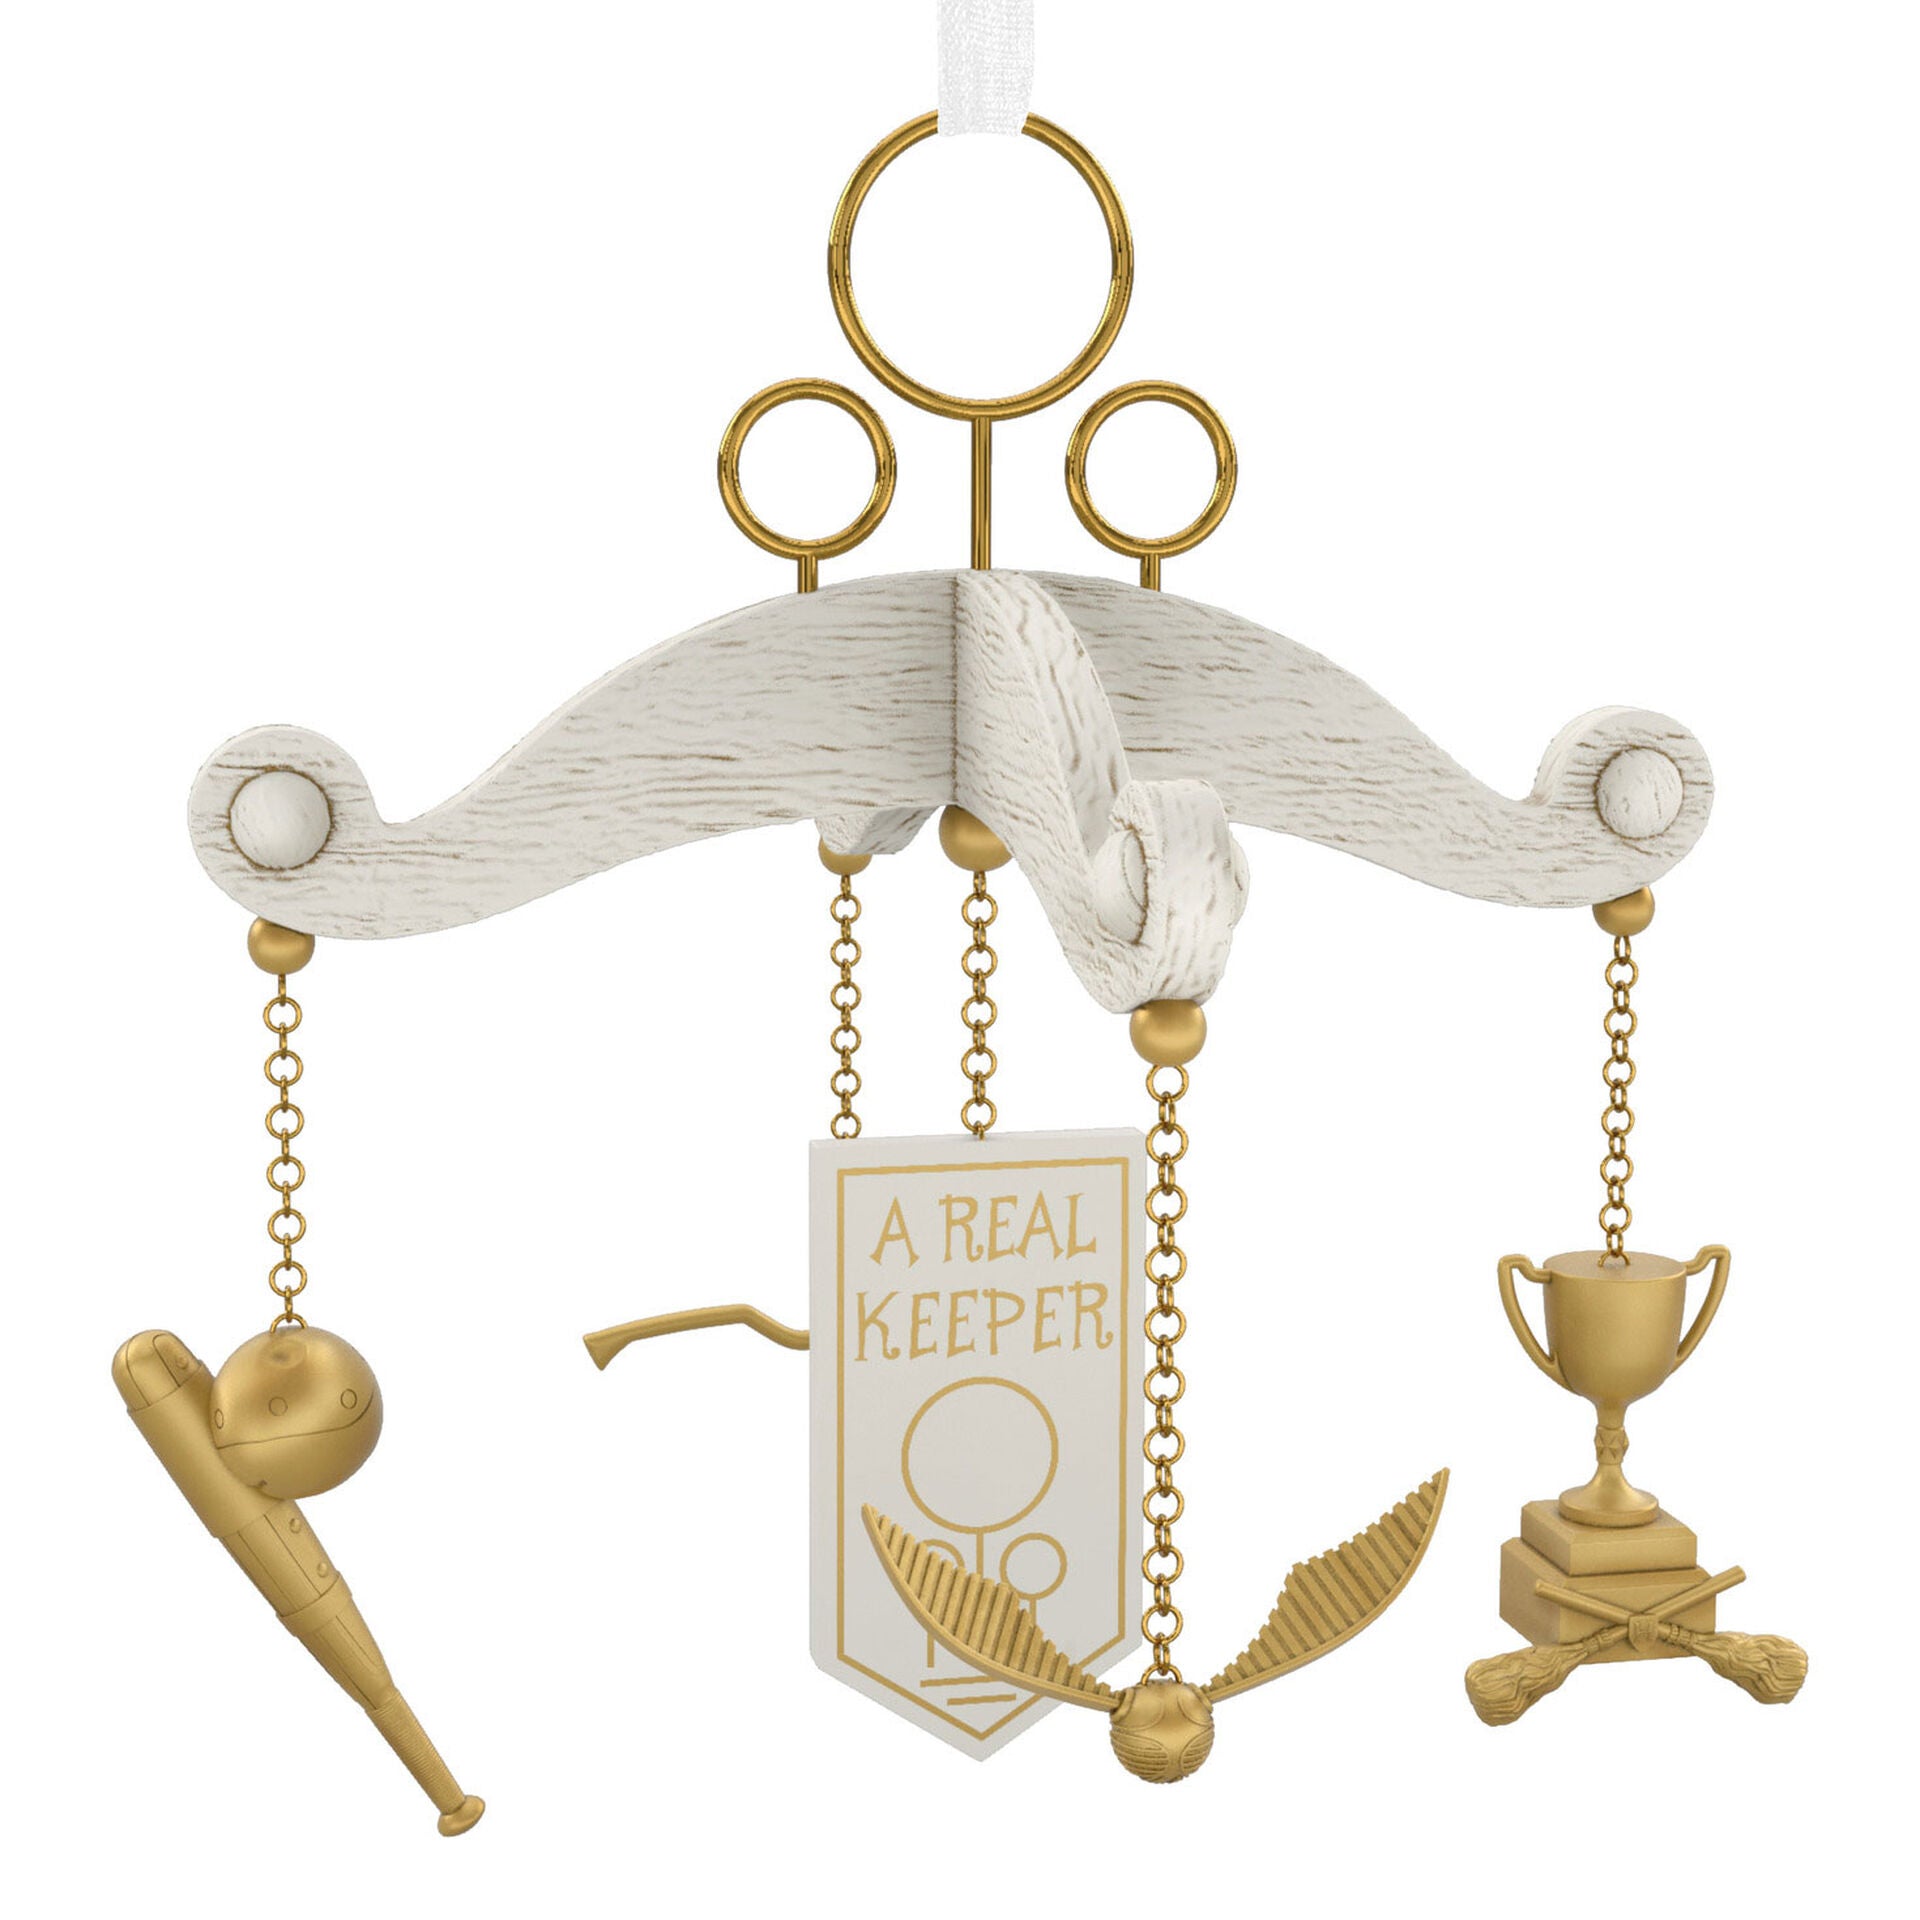 A Christmas ornament that is a white and gold Harry Potter Quidditch themed baby mobile. The center is a banner that says "A Real Keeper" and is surrounded by four Quidditch gear figures.